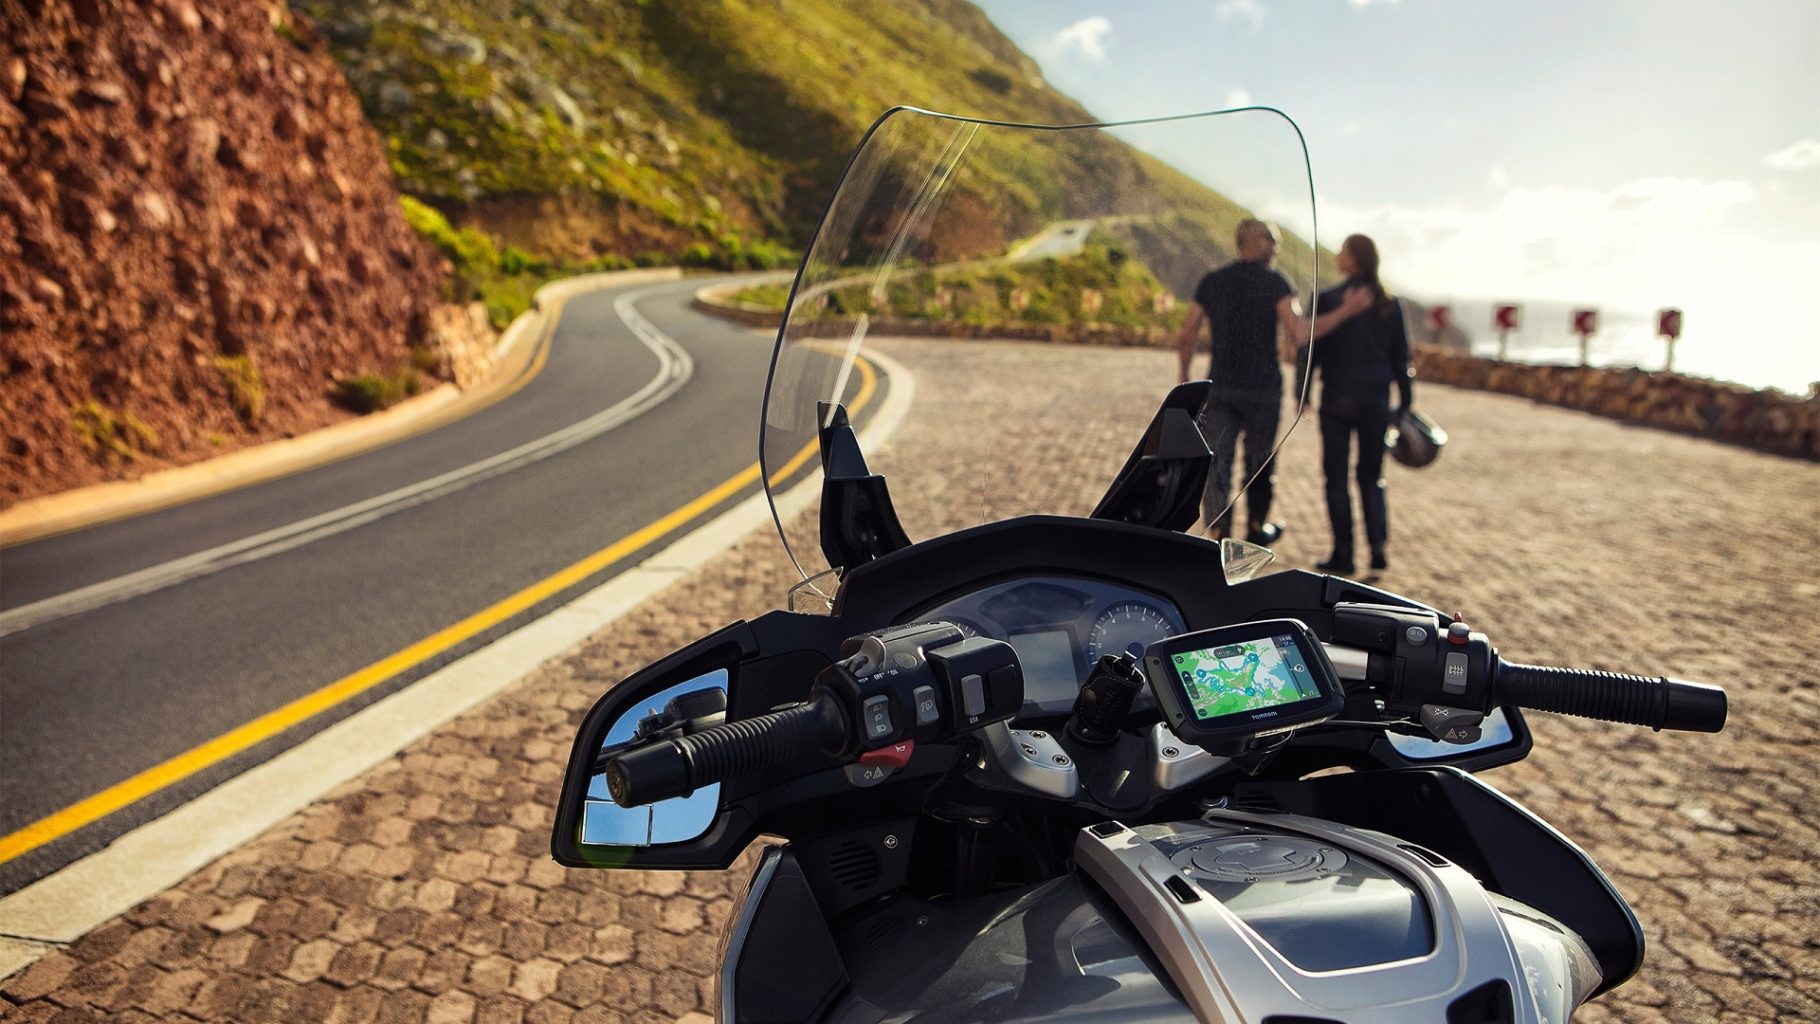 Best Motorcycle Gadgets That Are Cool To Have